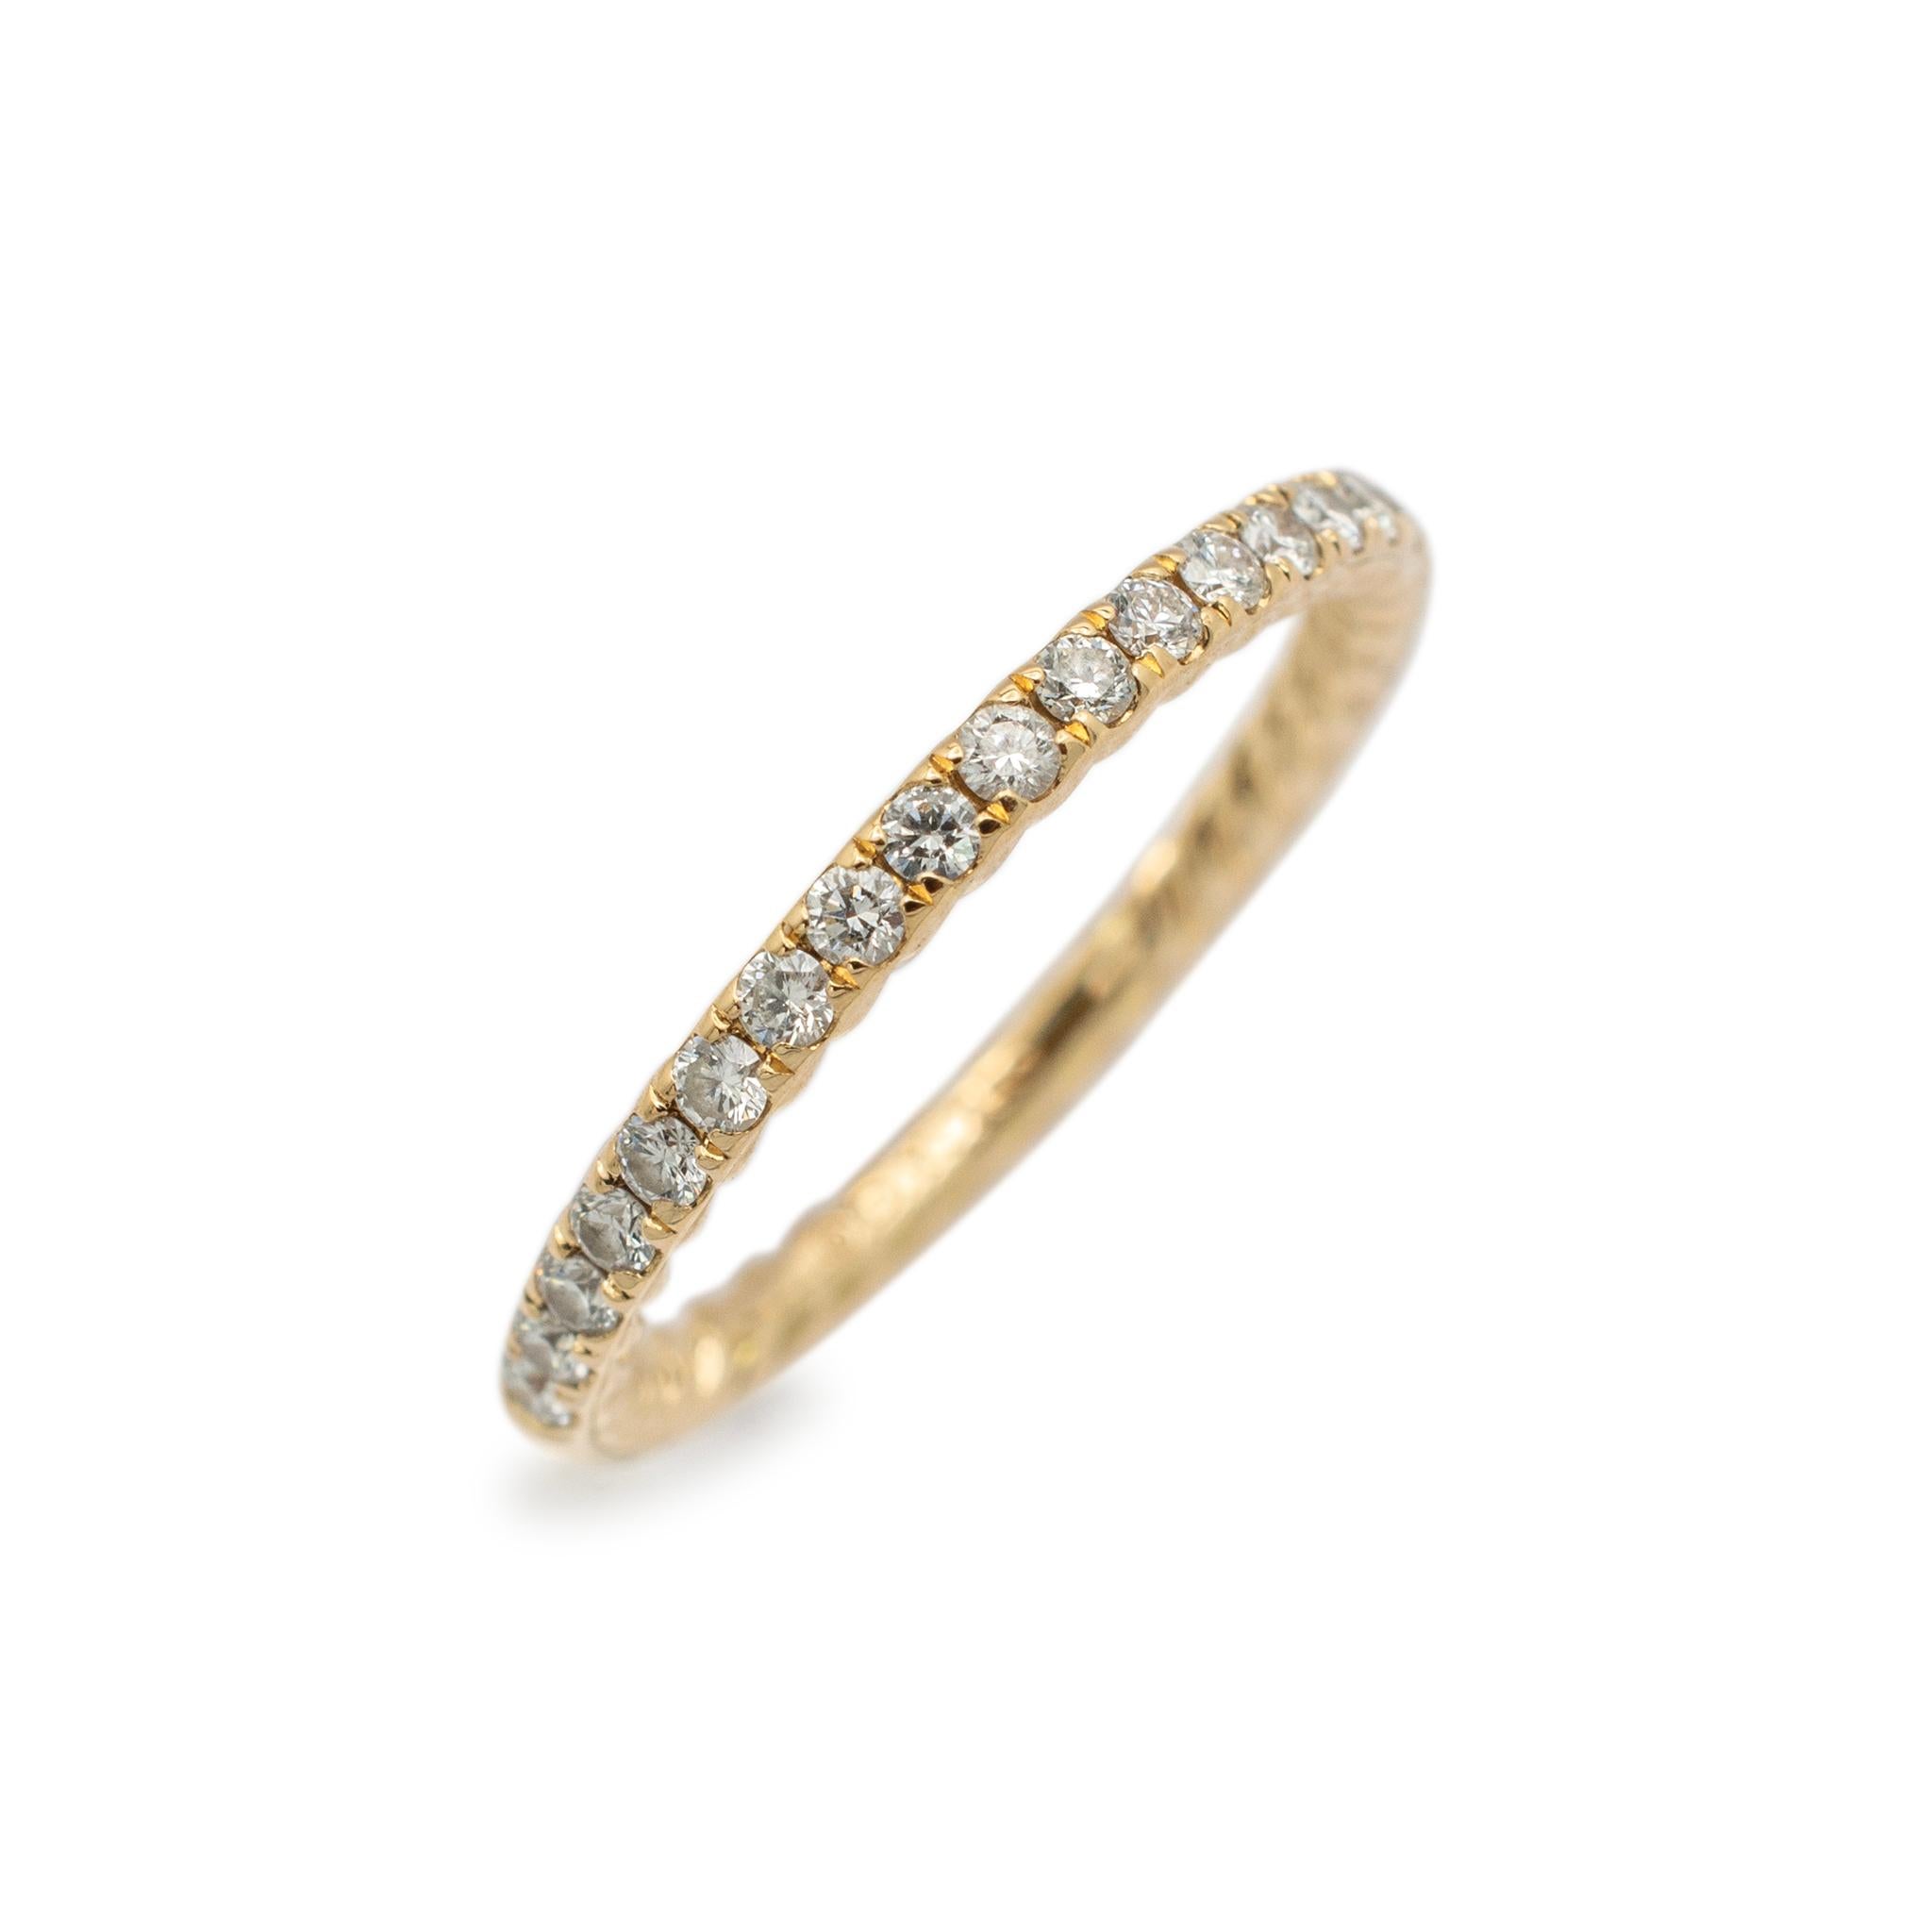 Brand: David Yurman

Gender: Ladies

Metal Type: 18K Yellow Gold

Size: 6

Shank Maximum Width: 1.85 mm

Weight: 2.13 grams

Ladies DAVID YURMAN 18K yellow gold diamond contemporary-style wedding band with a half-round shank. Engraved with 